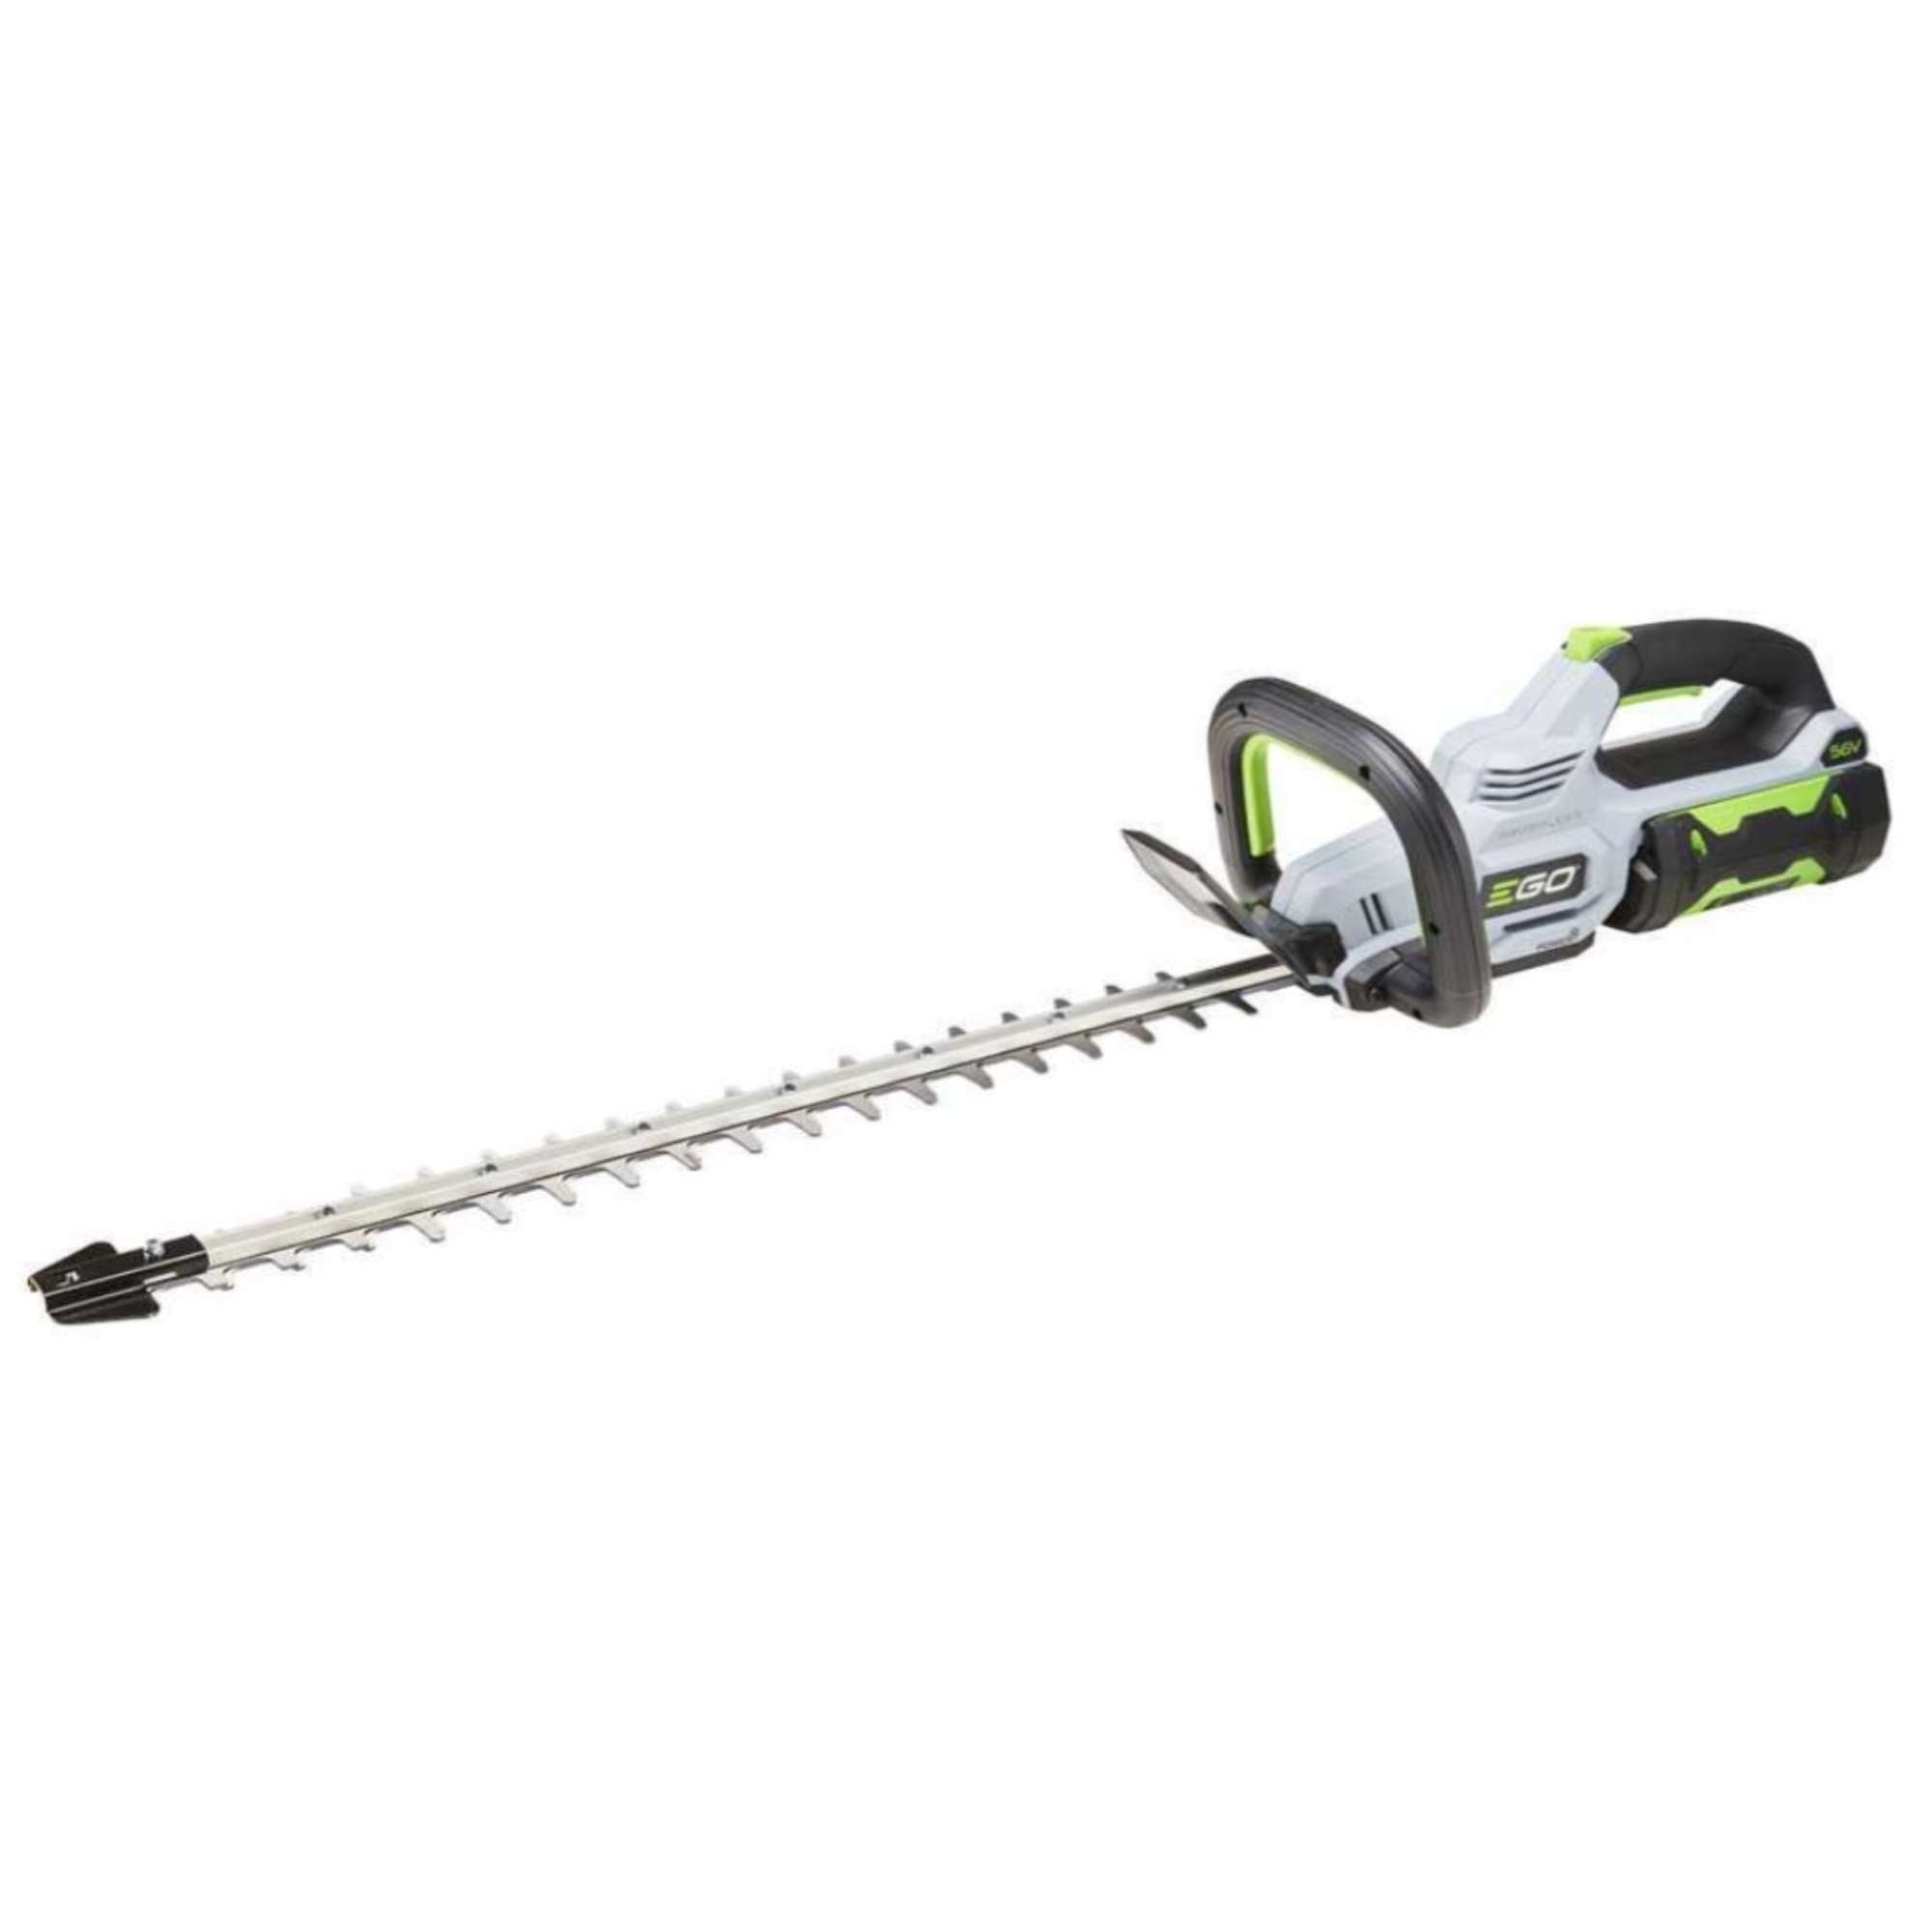 61cm Body-only Battery Hedge Trimmer - Ego 48220 HT2410E